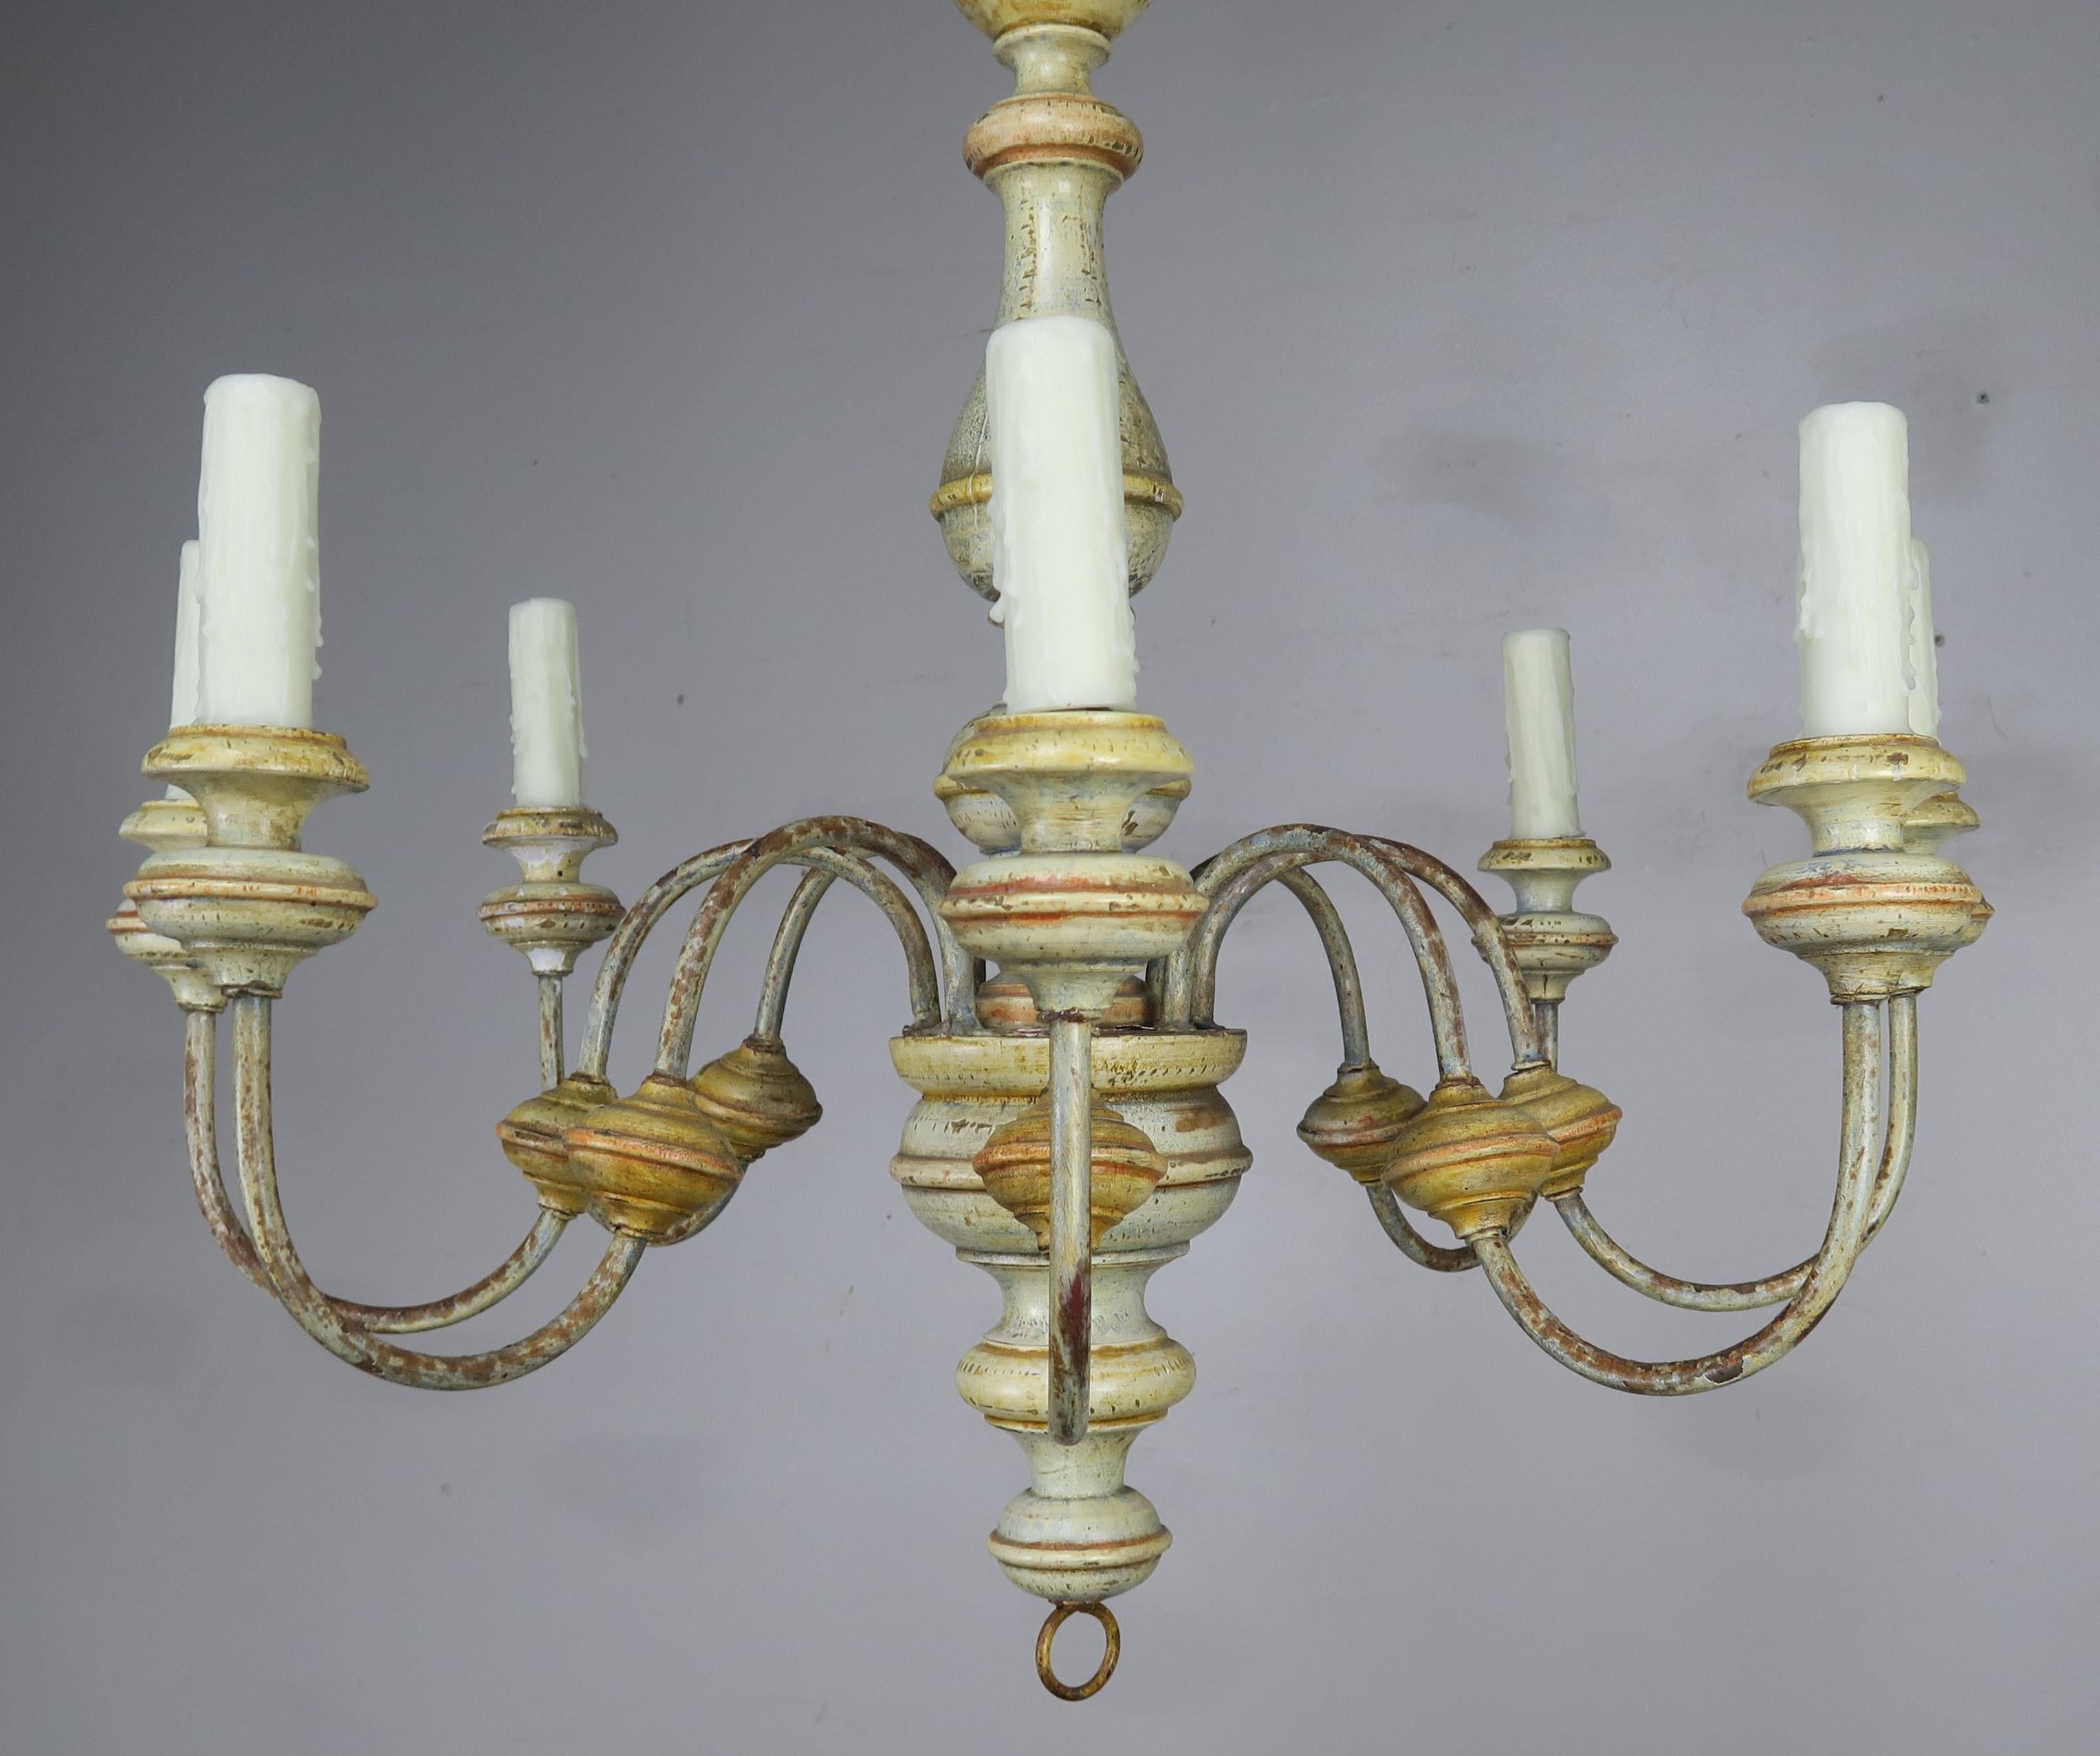 Hand-Painted 8-Light Italian Painted Chandelier